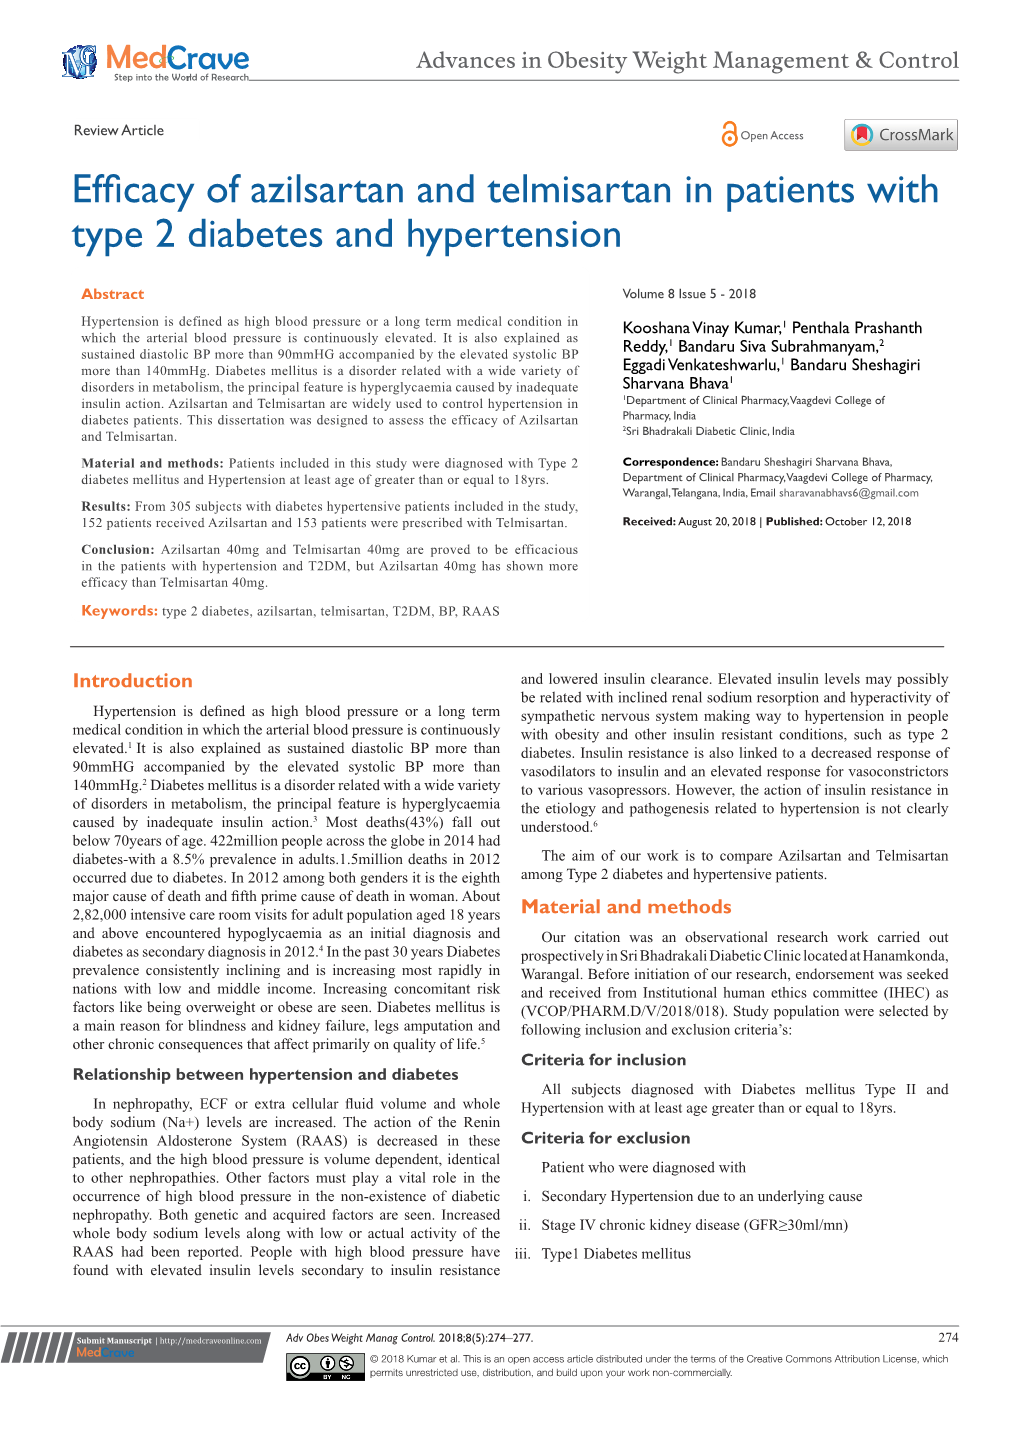 Efficacy of Azilsartan and Telmisartan in Patients with Type 2 Diabetes and Hypertension